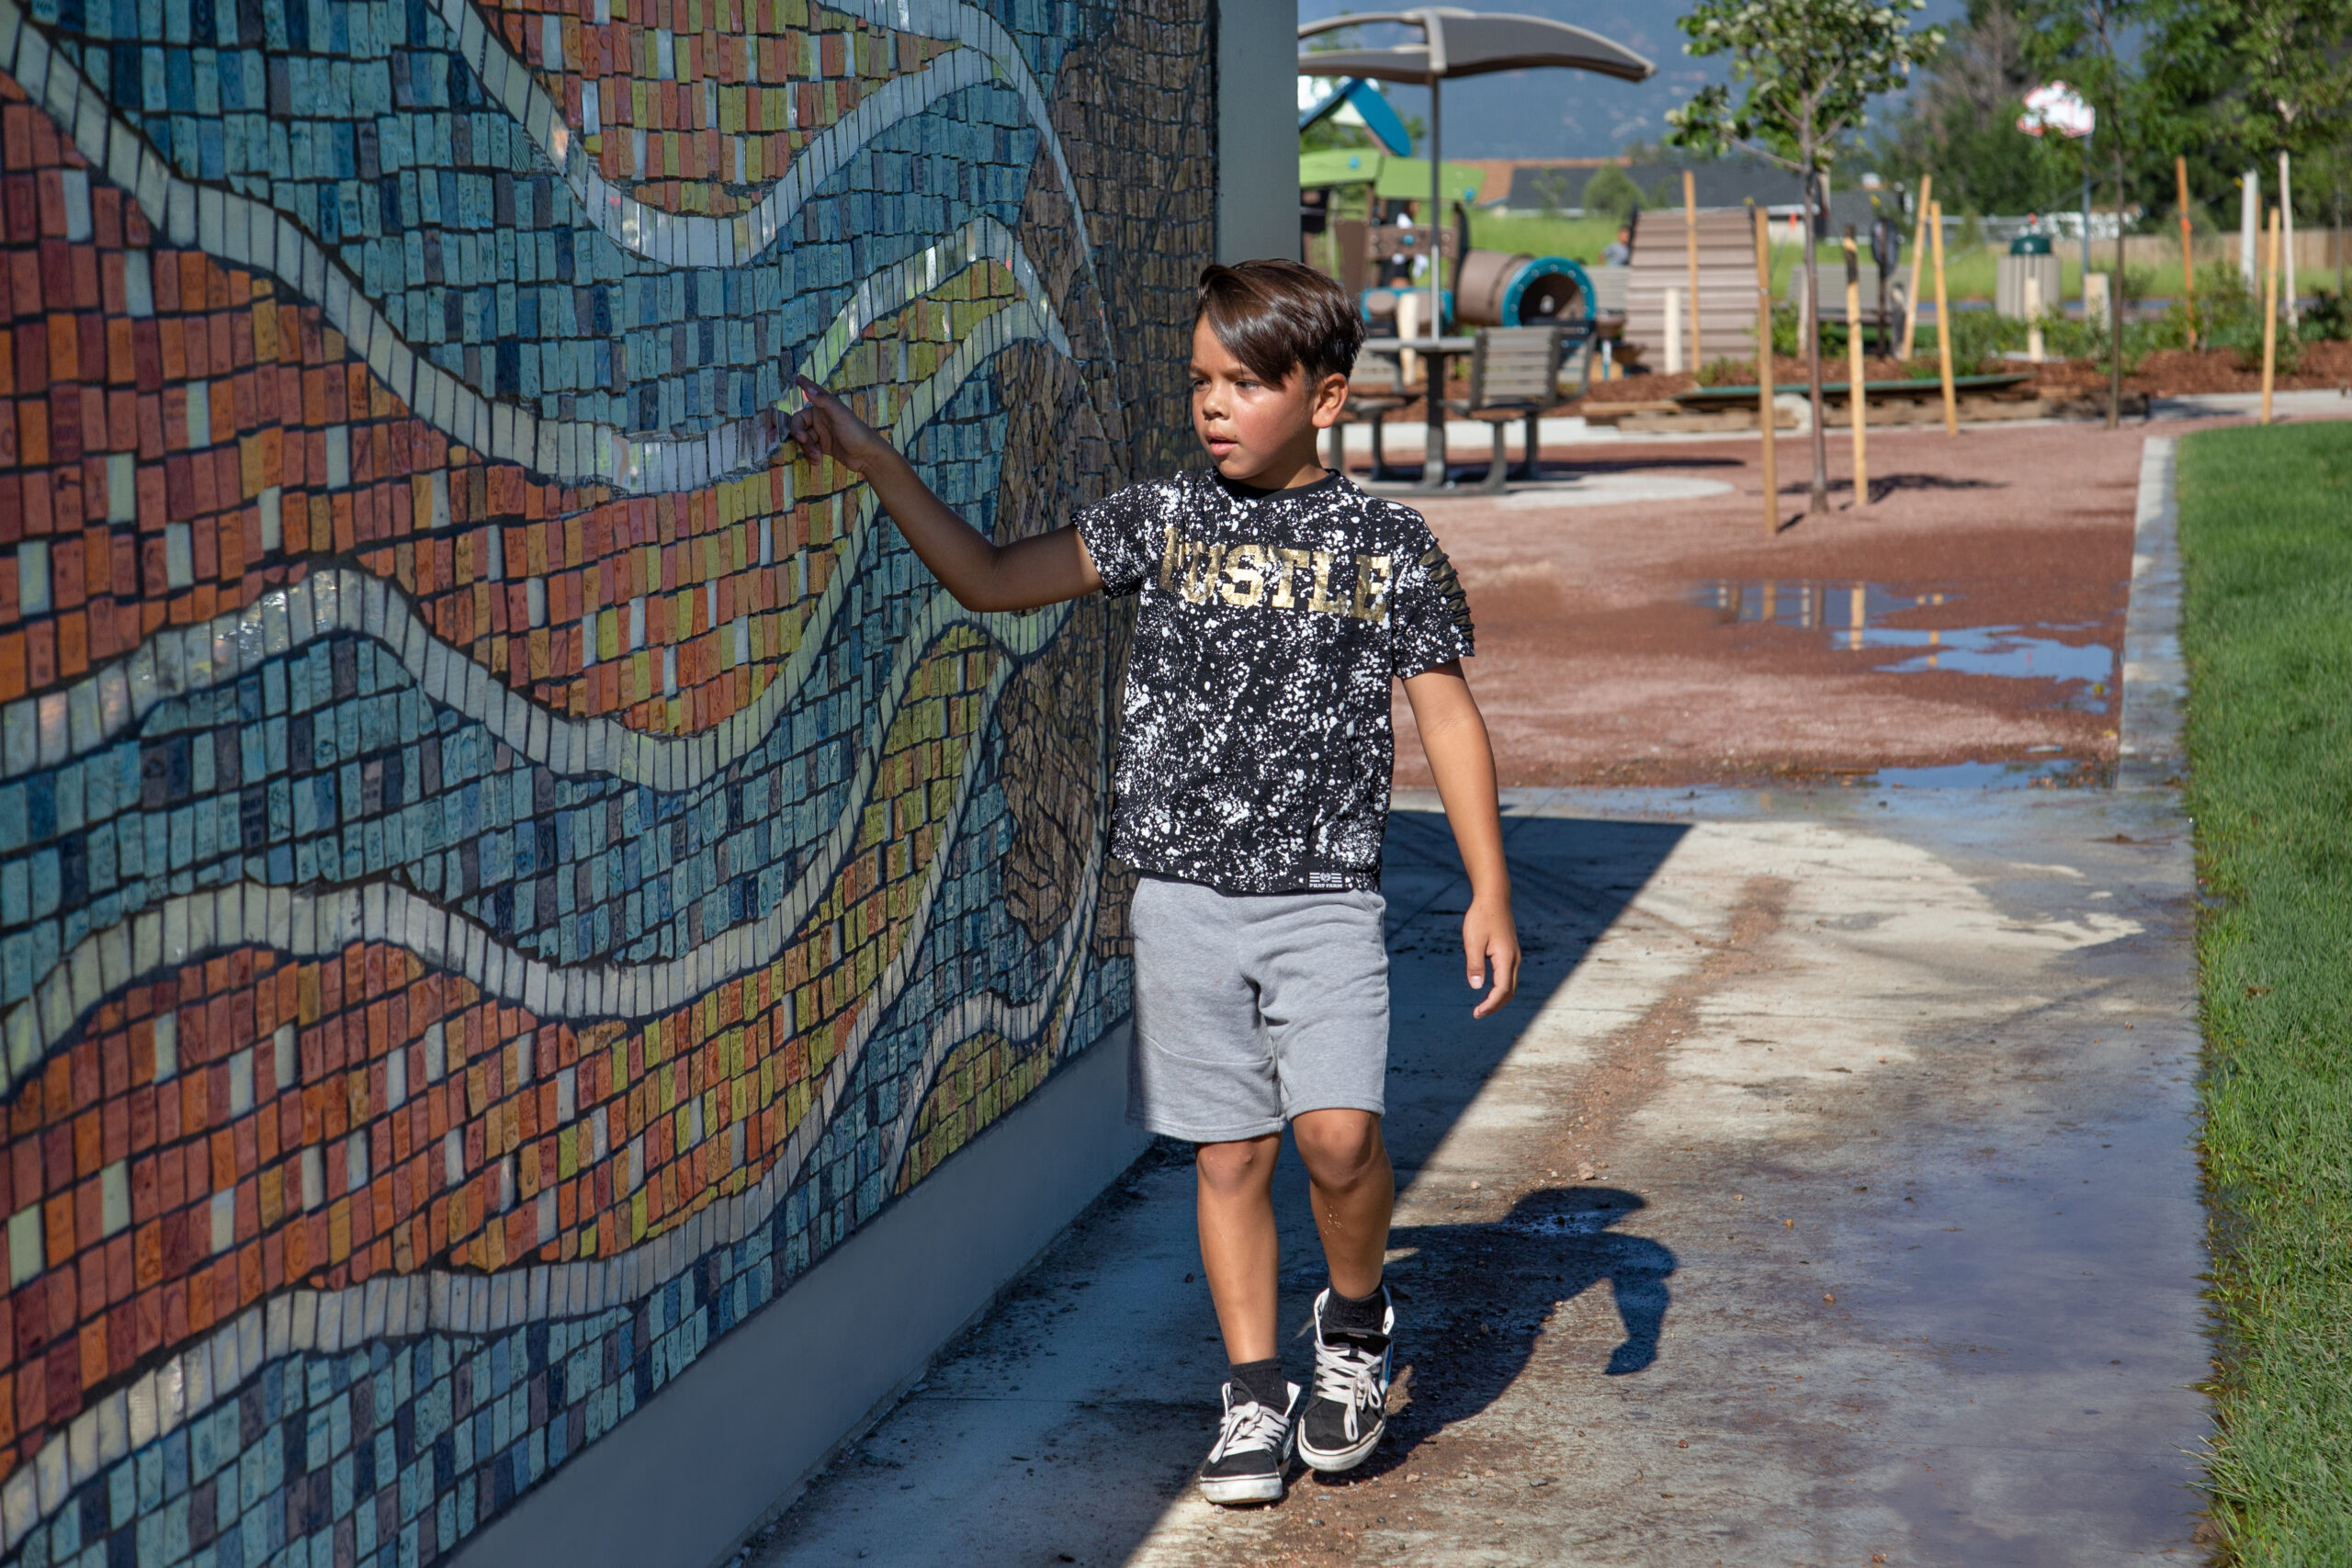 A boy explores a colorful mosaic reflecting community values, touching his hand to the wall as he walks by. 